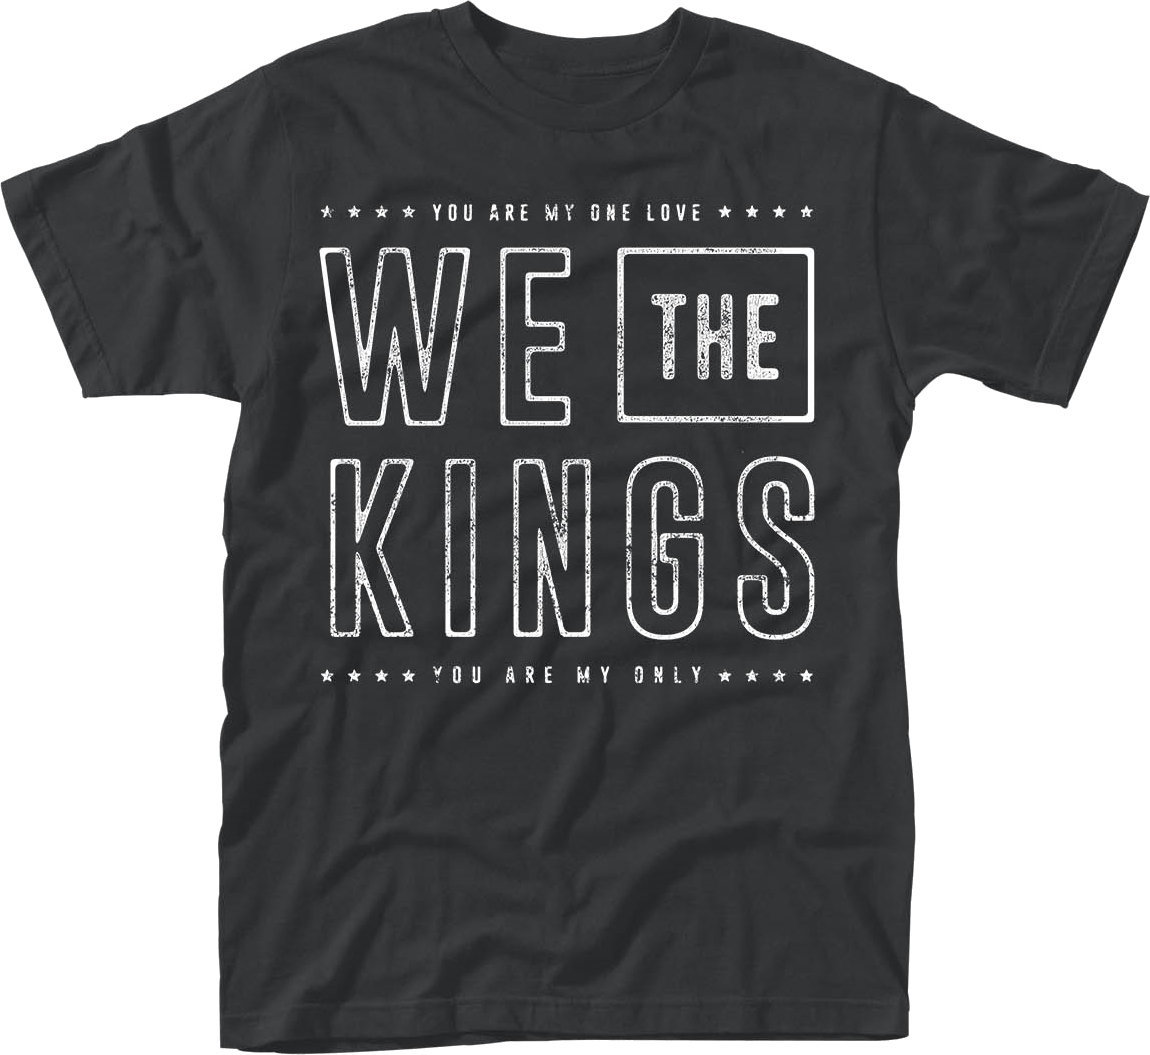 T-Shirt We The Kings T-Shirt You Are My Only Black 2XL